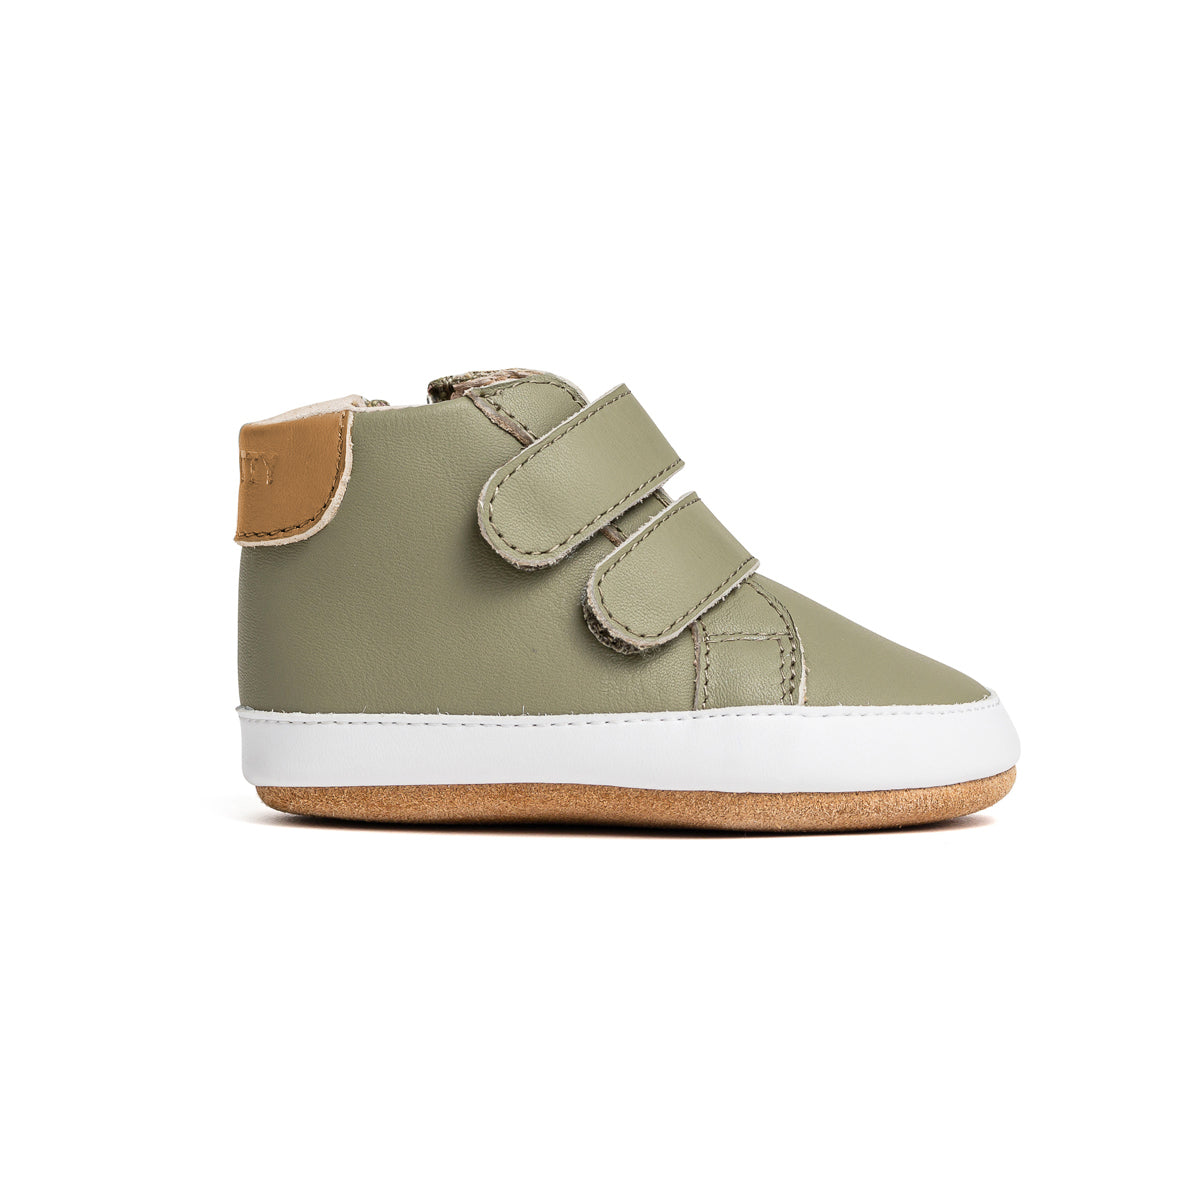 Side view of Hi Top in colour Khaki